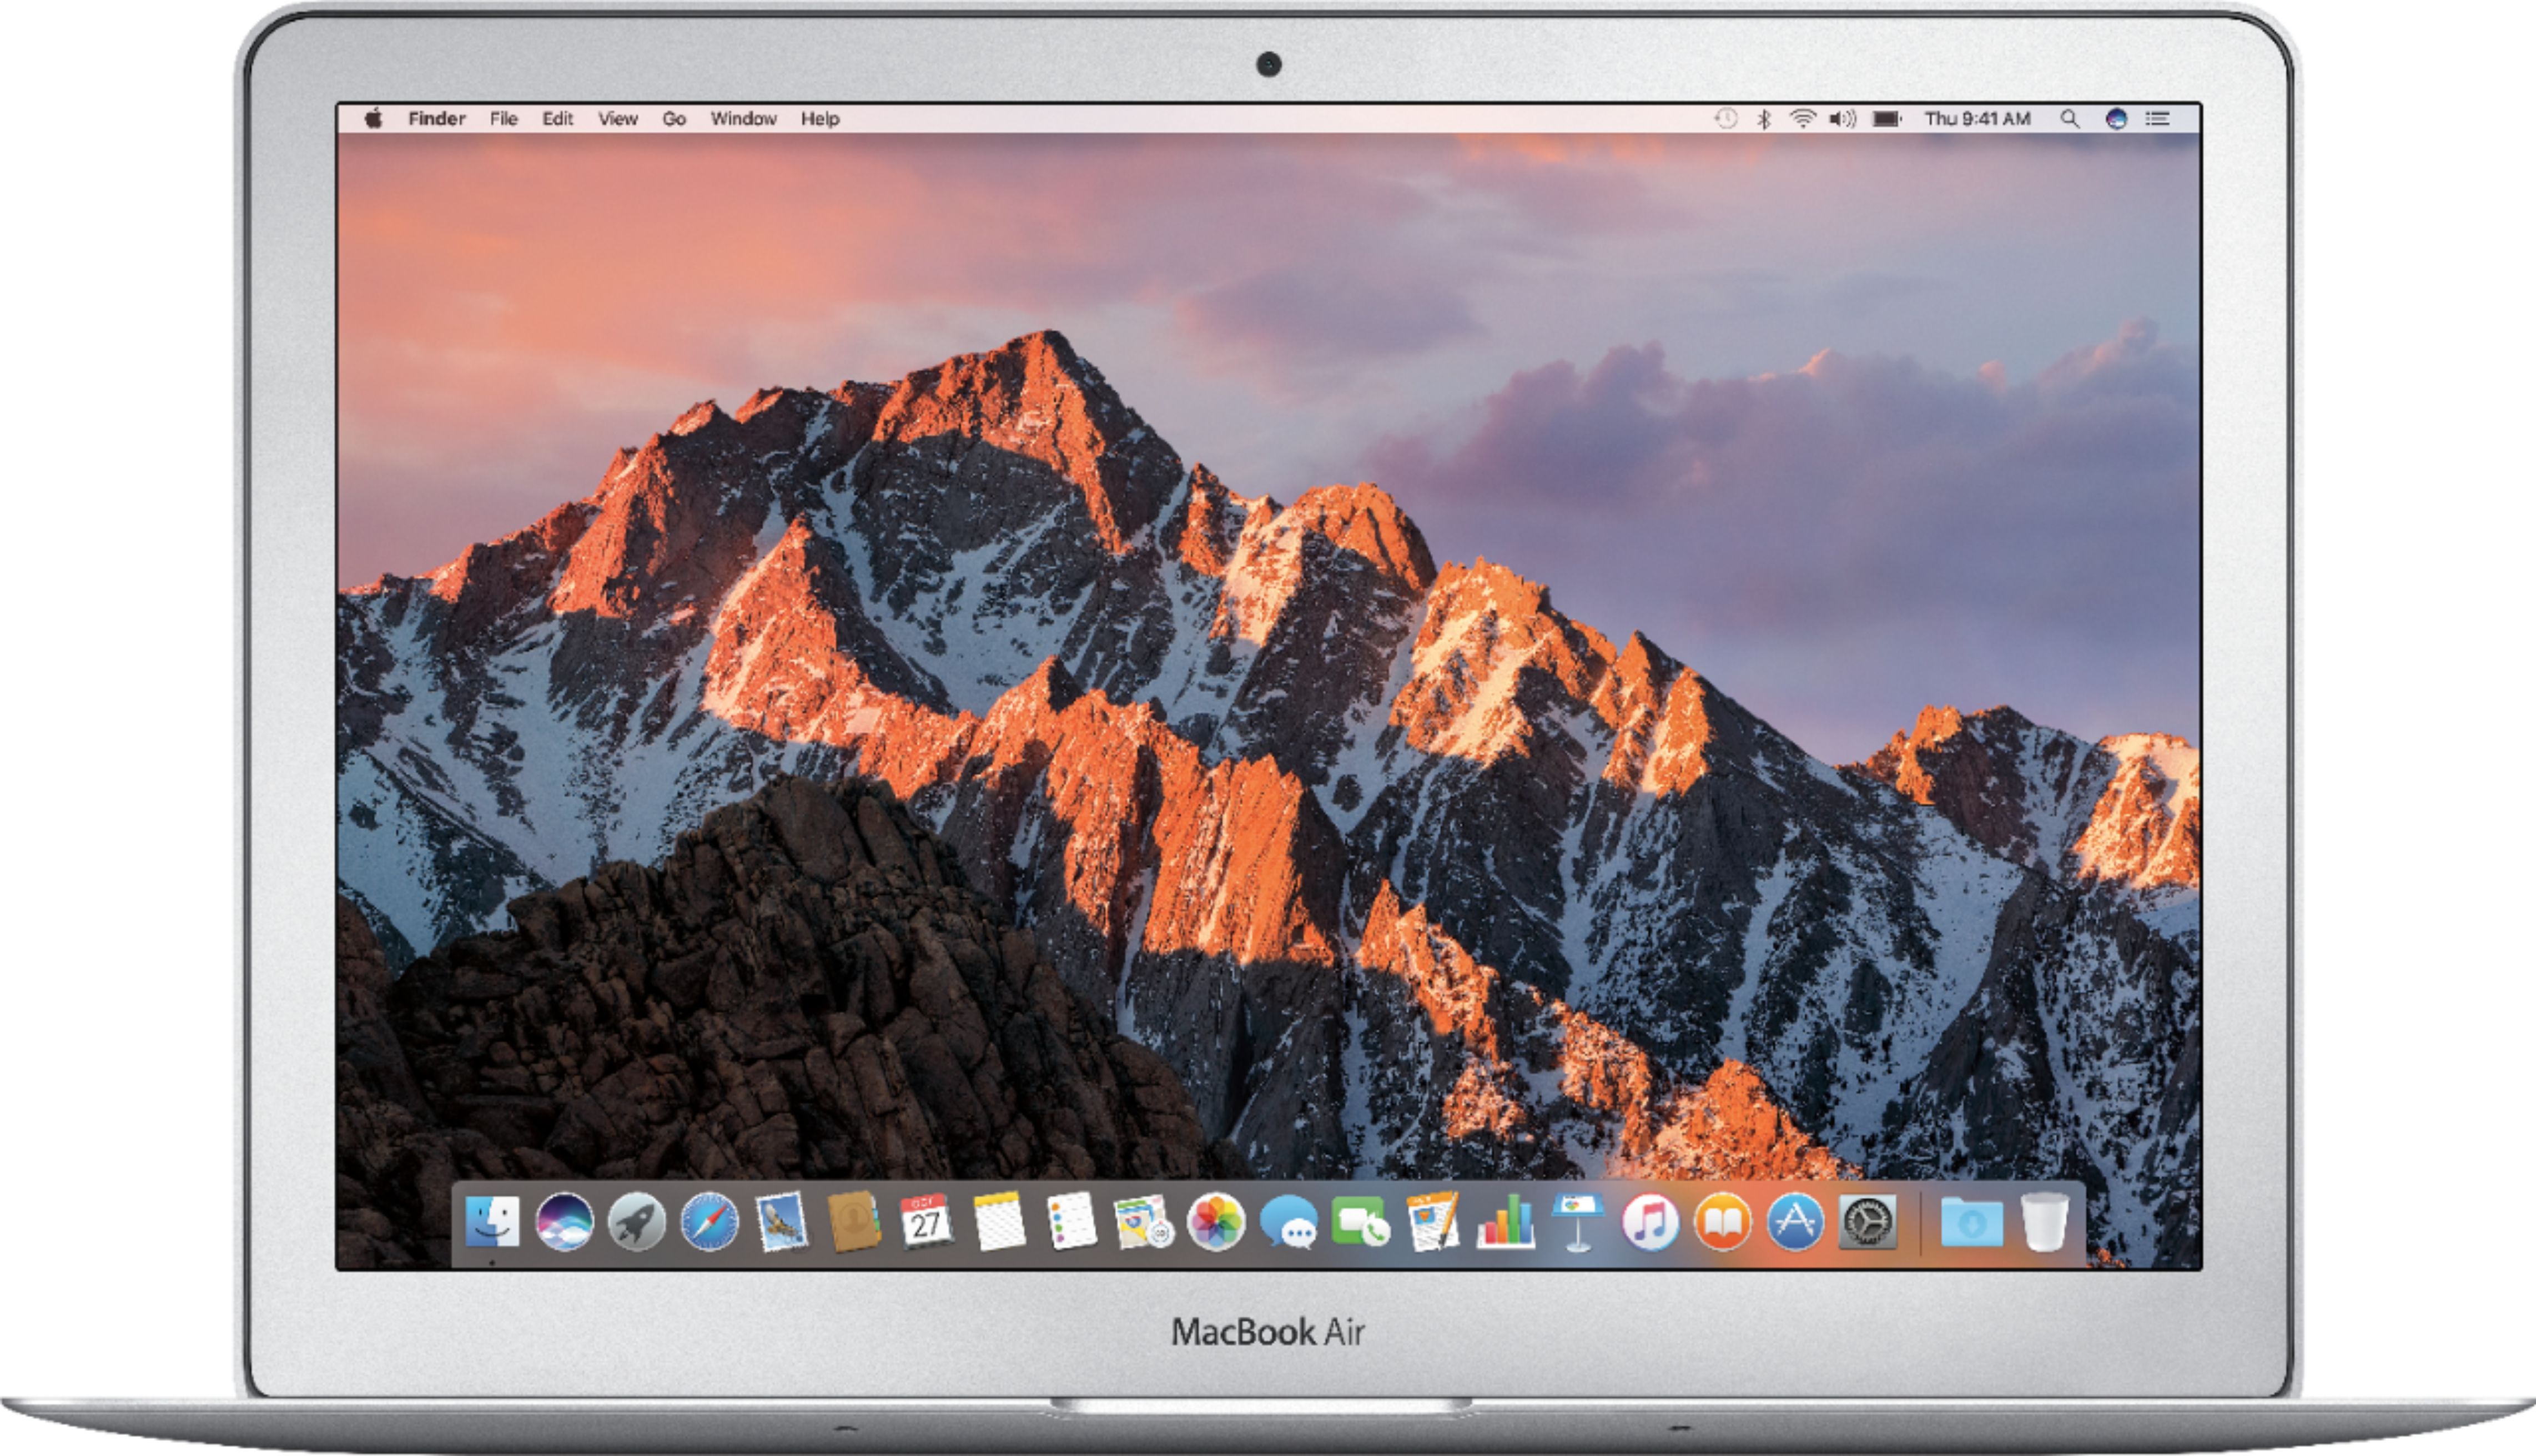 Apple MacBook Air 13.3" Laptop with Intel Core i5 / 8GB / 128GB SSD / OS X (MMGF2LL/A)